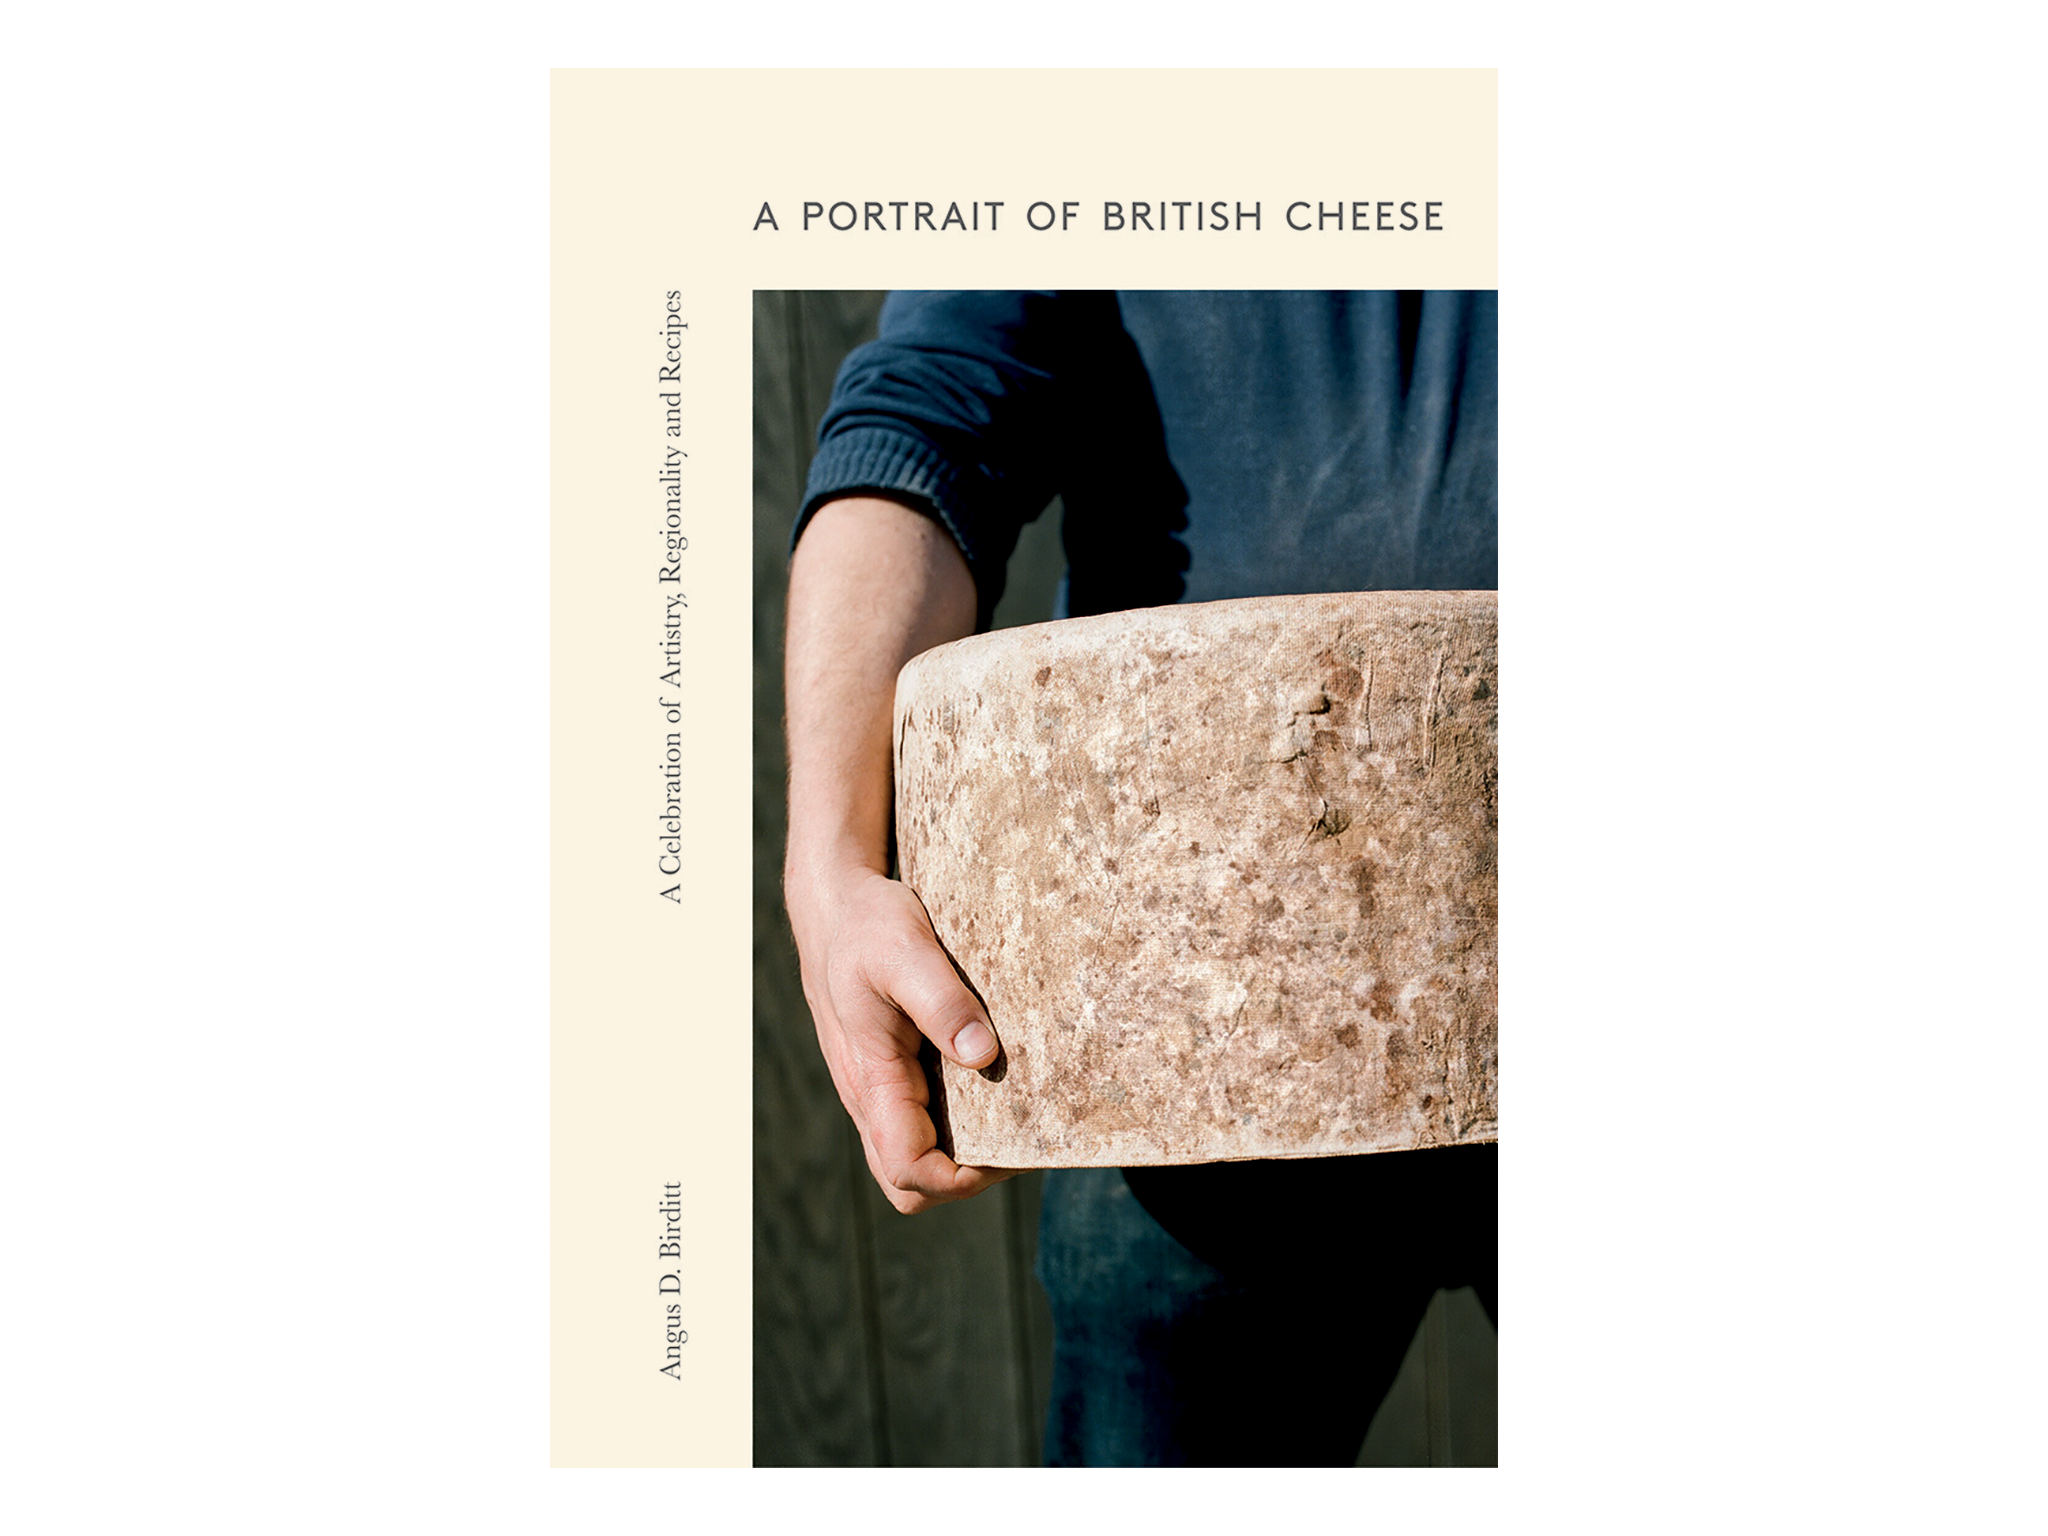 ‘A Portrait of British Cheese’ by Angus D. Birditt, published by Quadrille.png